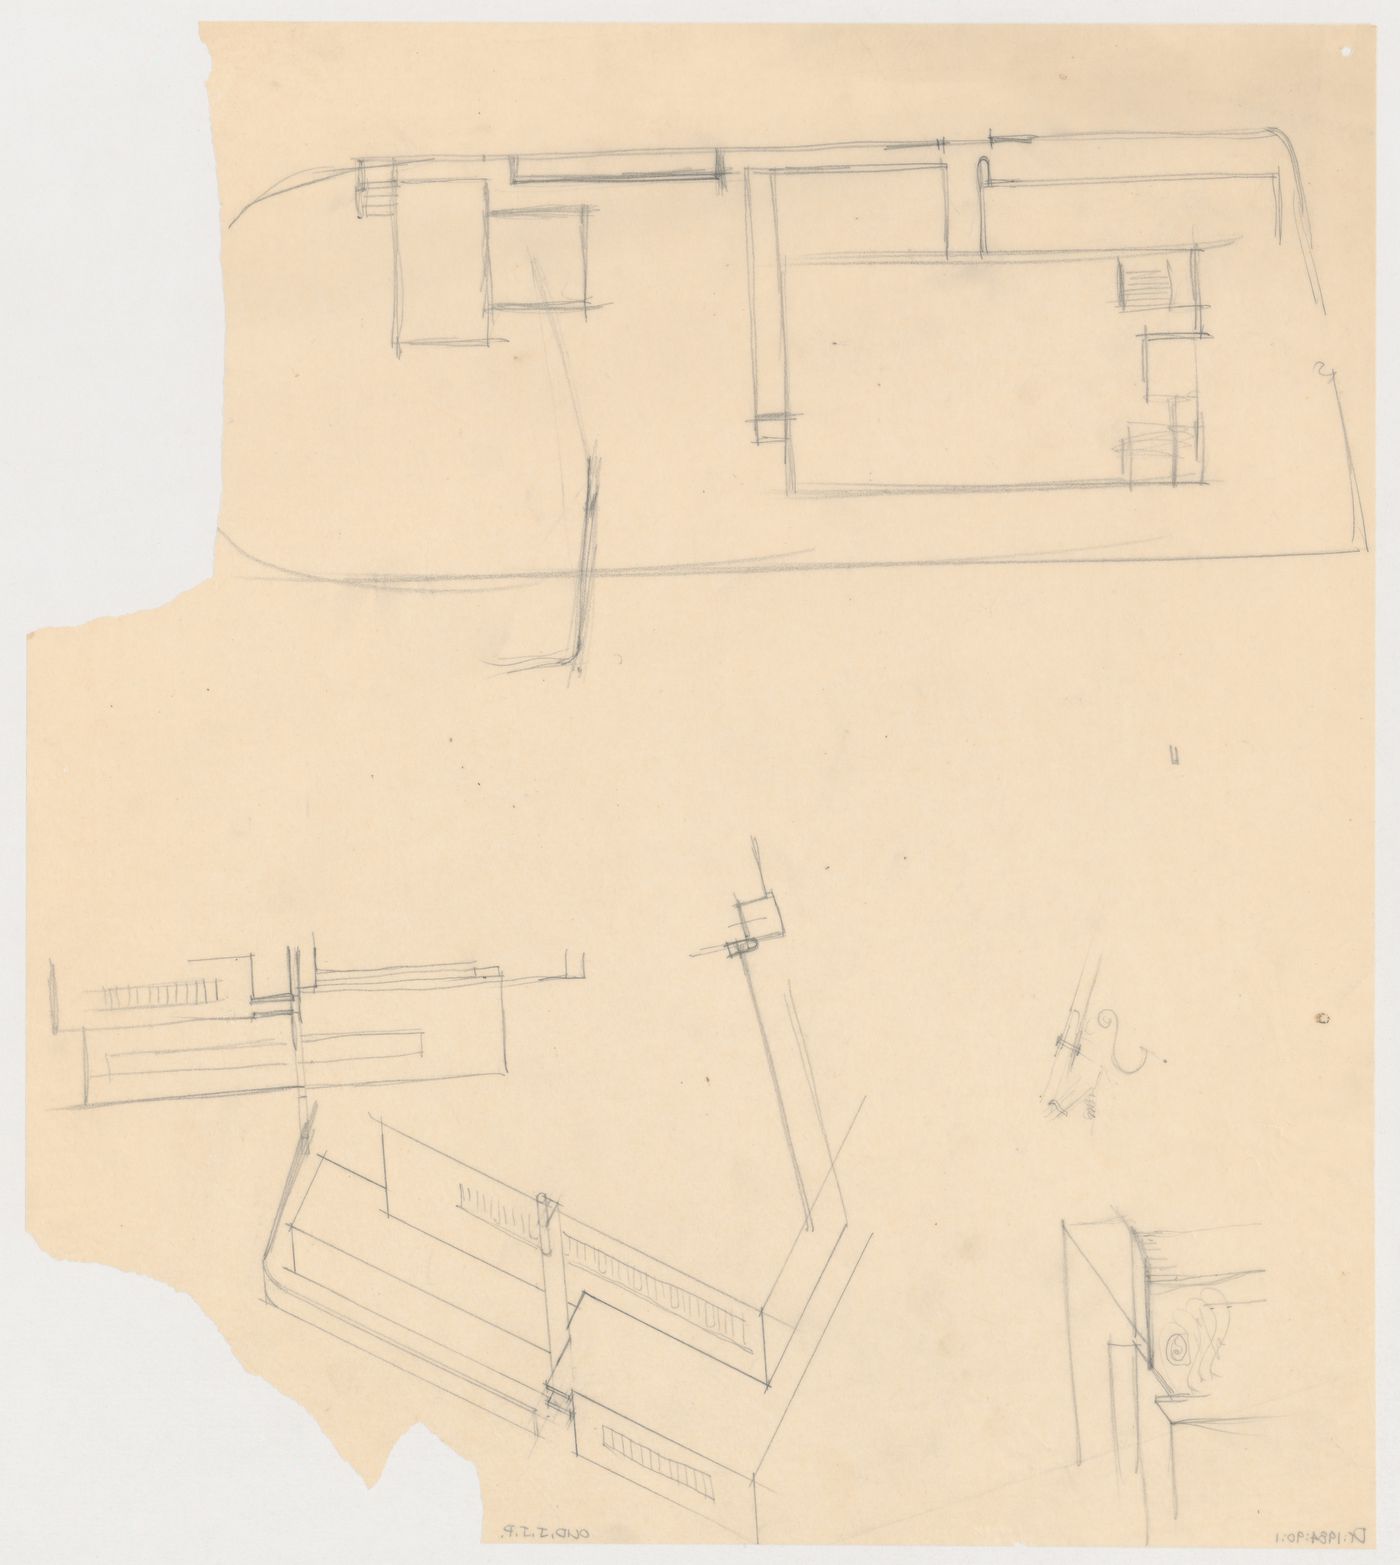 Partial sketch elevation, sketch plan and partial axonometrics for the church for Kiefhoek Housing Estate, Rotterdam, Netherlands